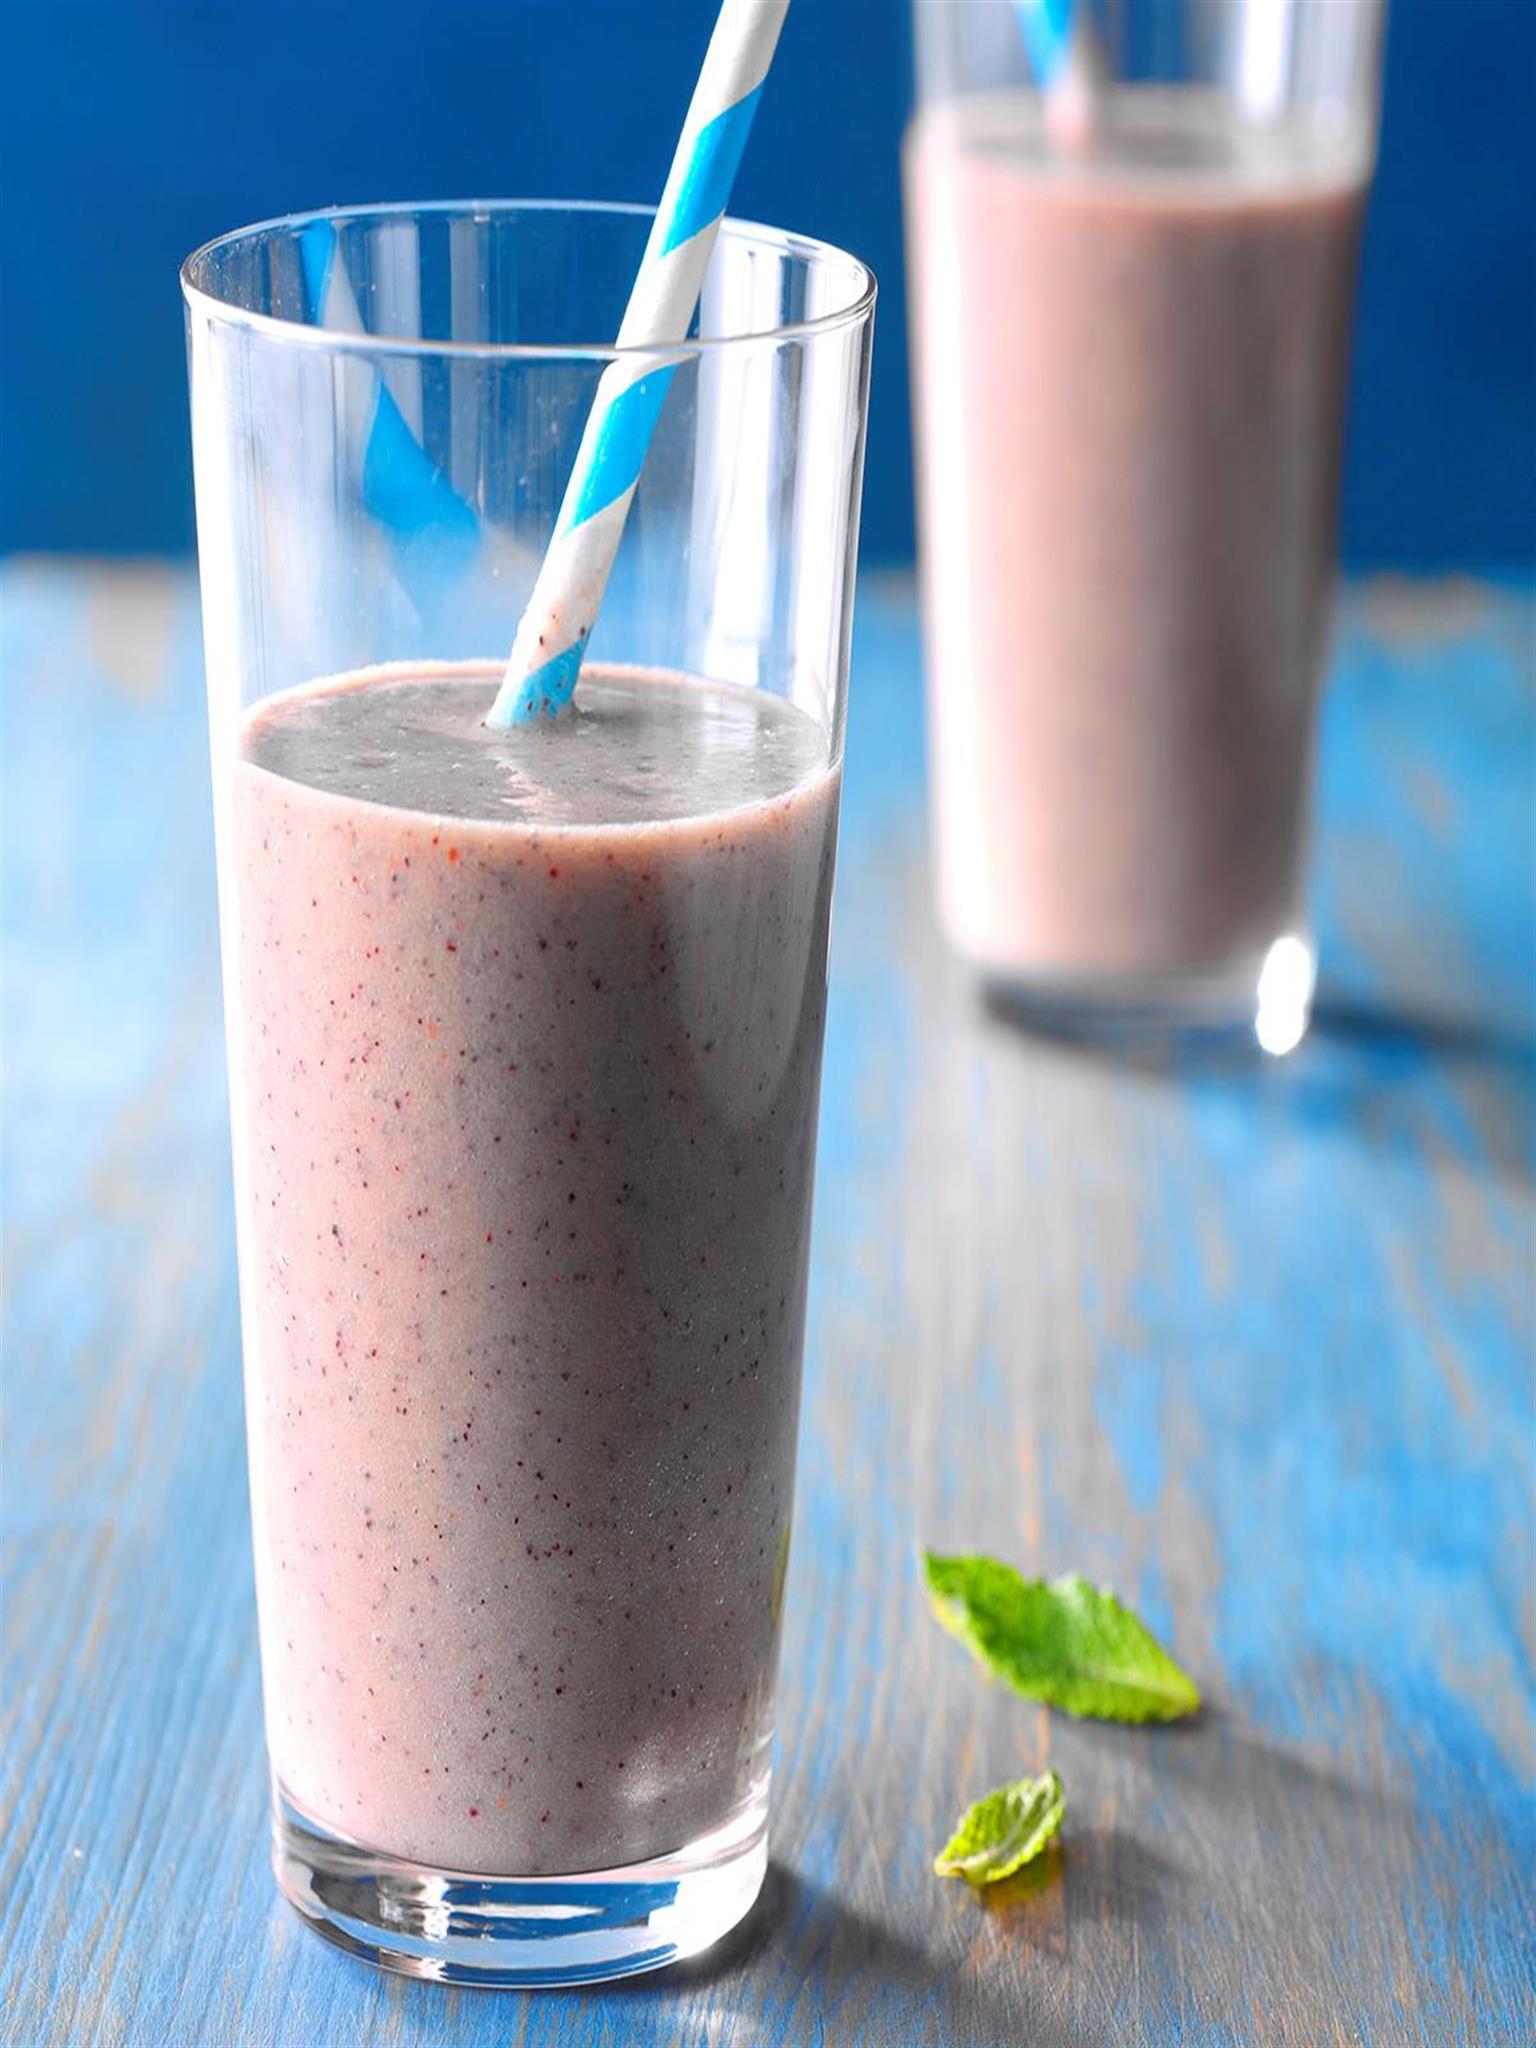 So-Healthy Smoothies Recipe: How to Make It